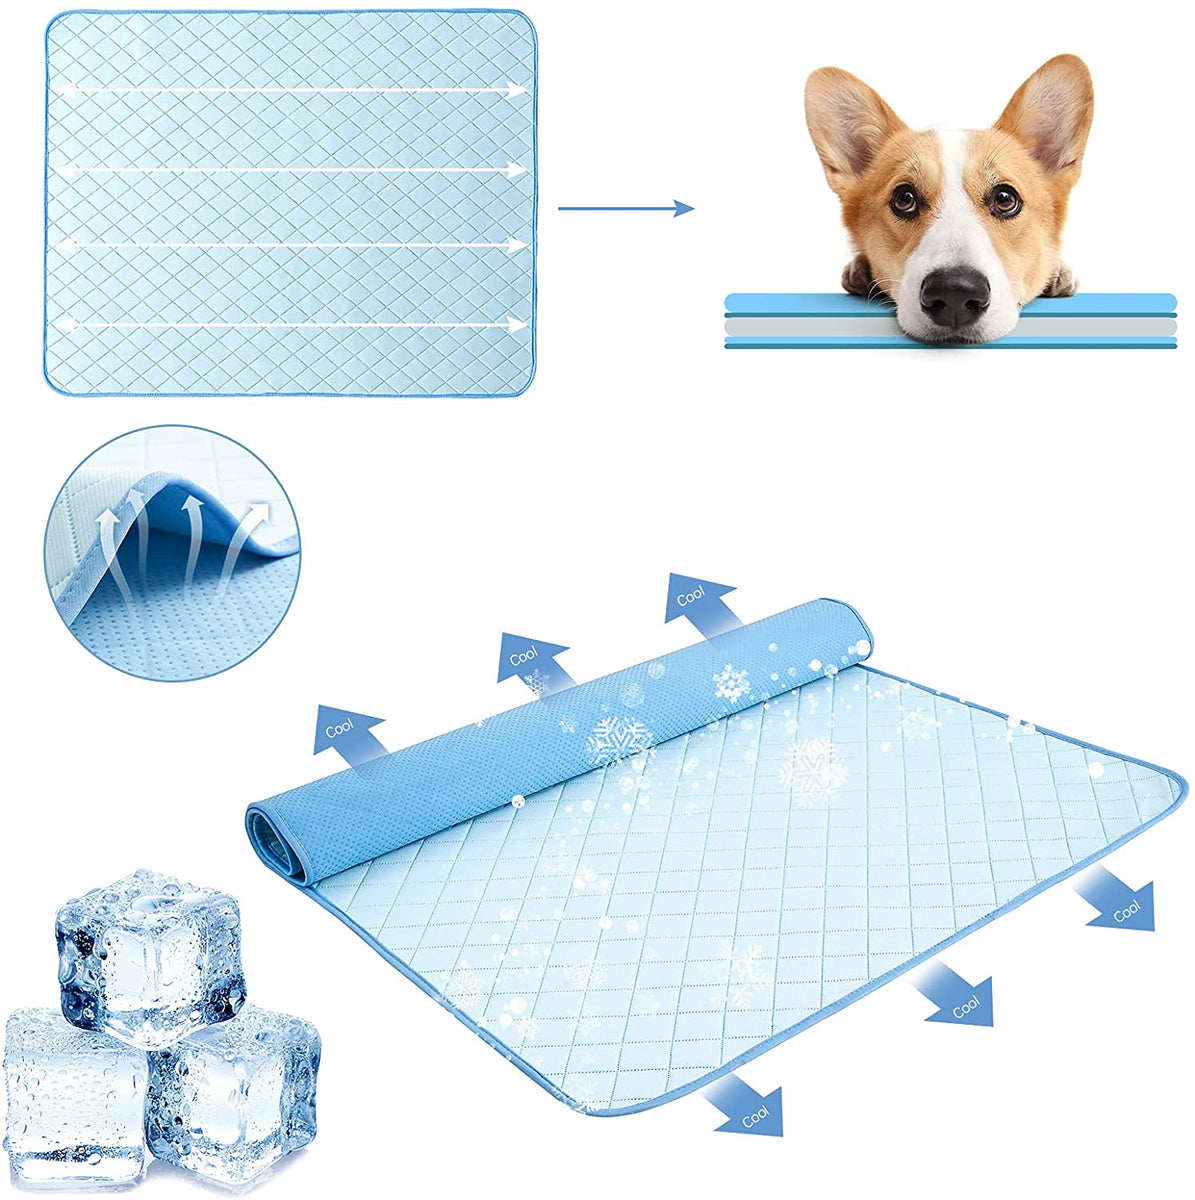 Worallymy Pet Mat Cooling Water Absorbing Pet Pad Foldable